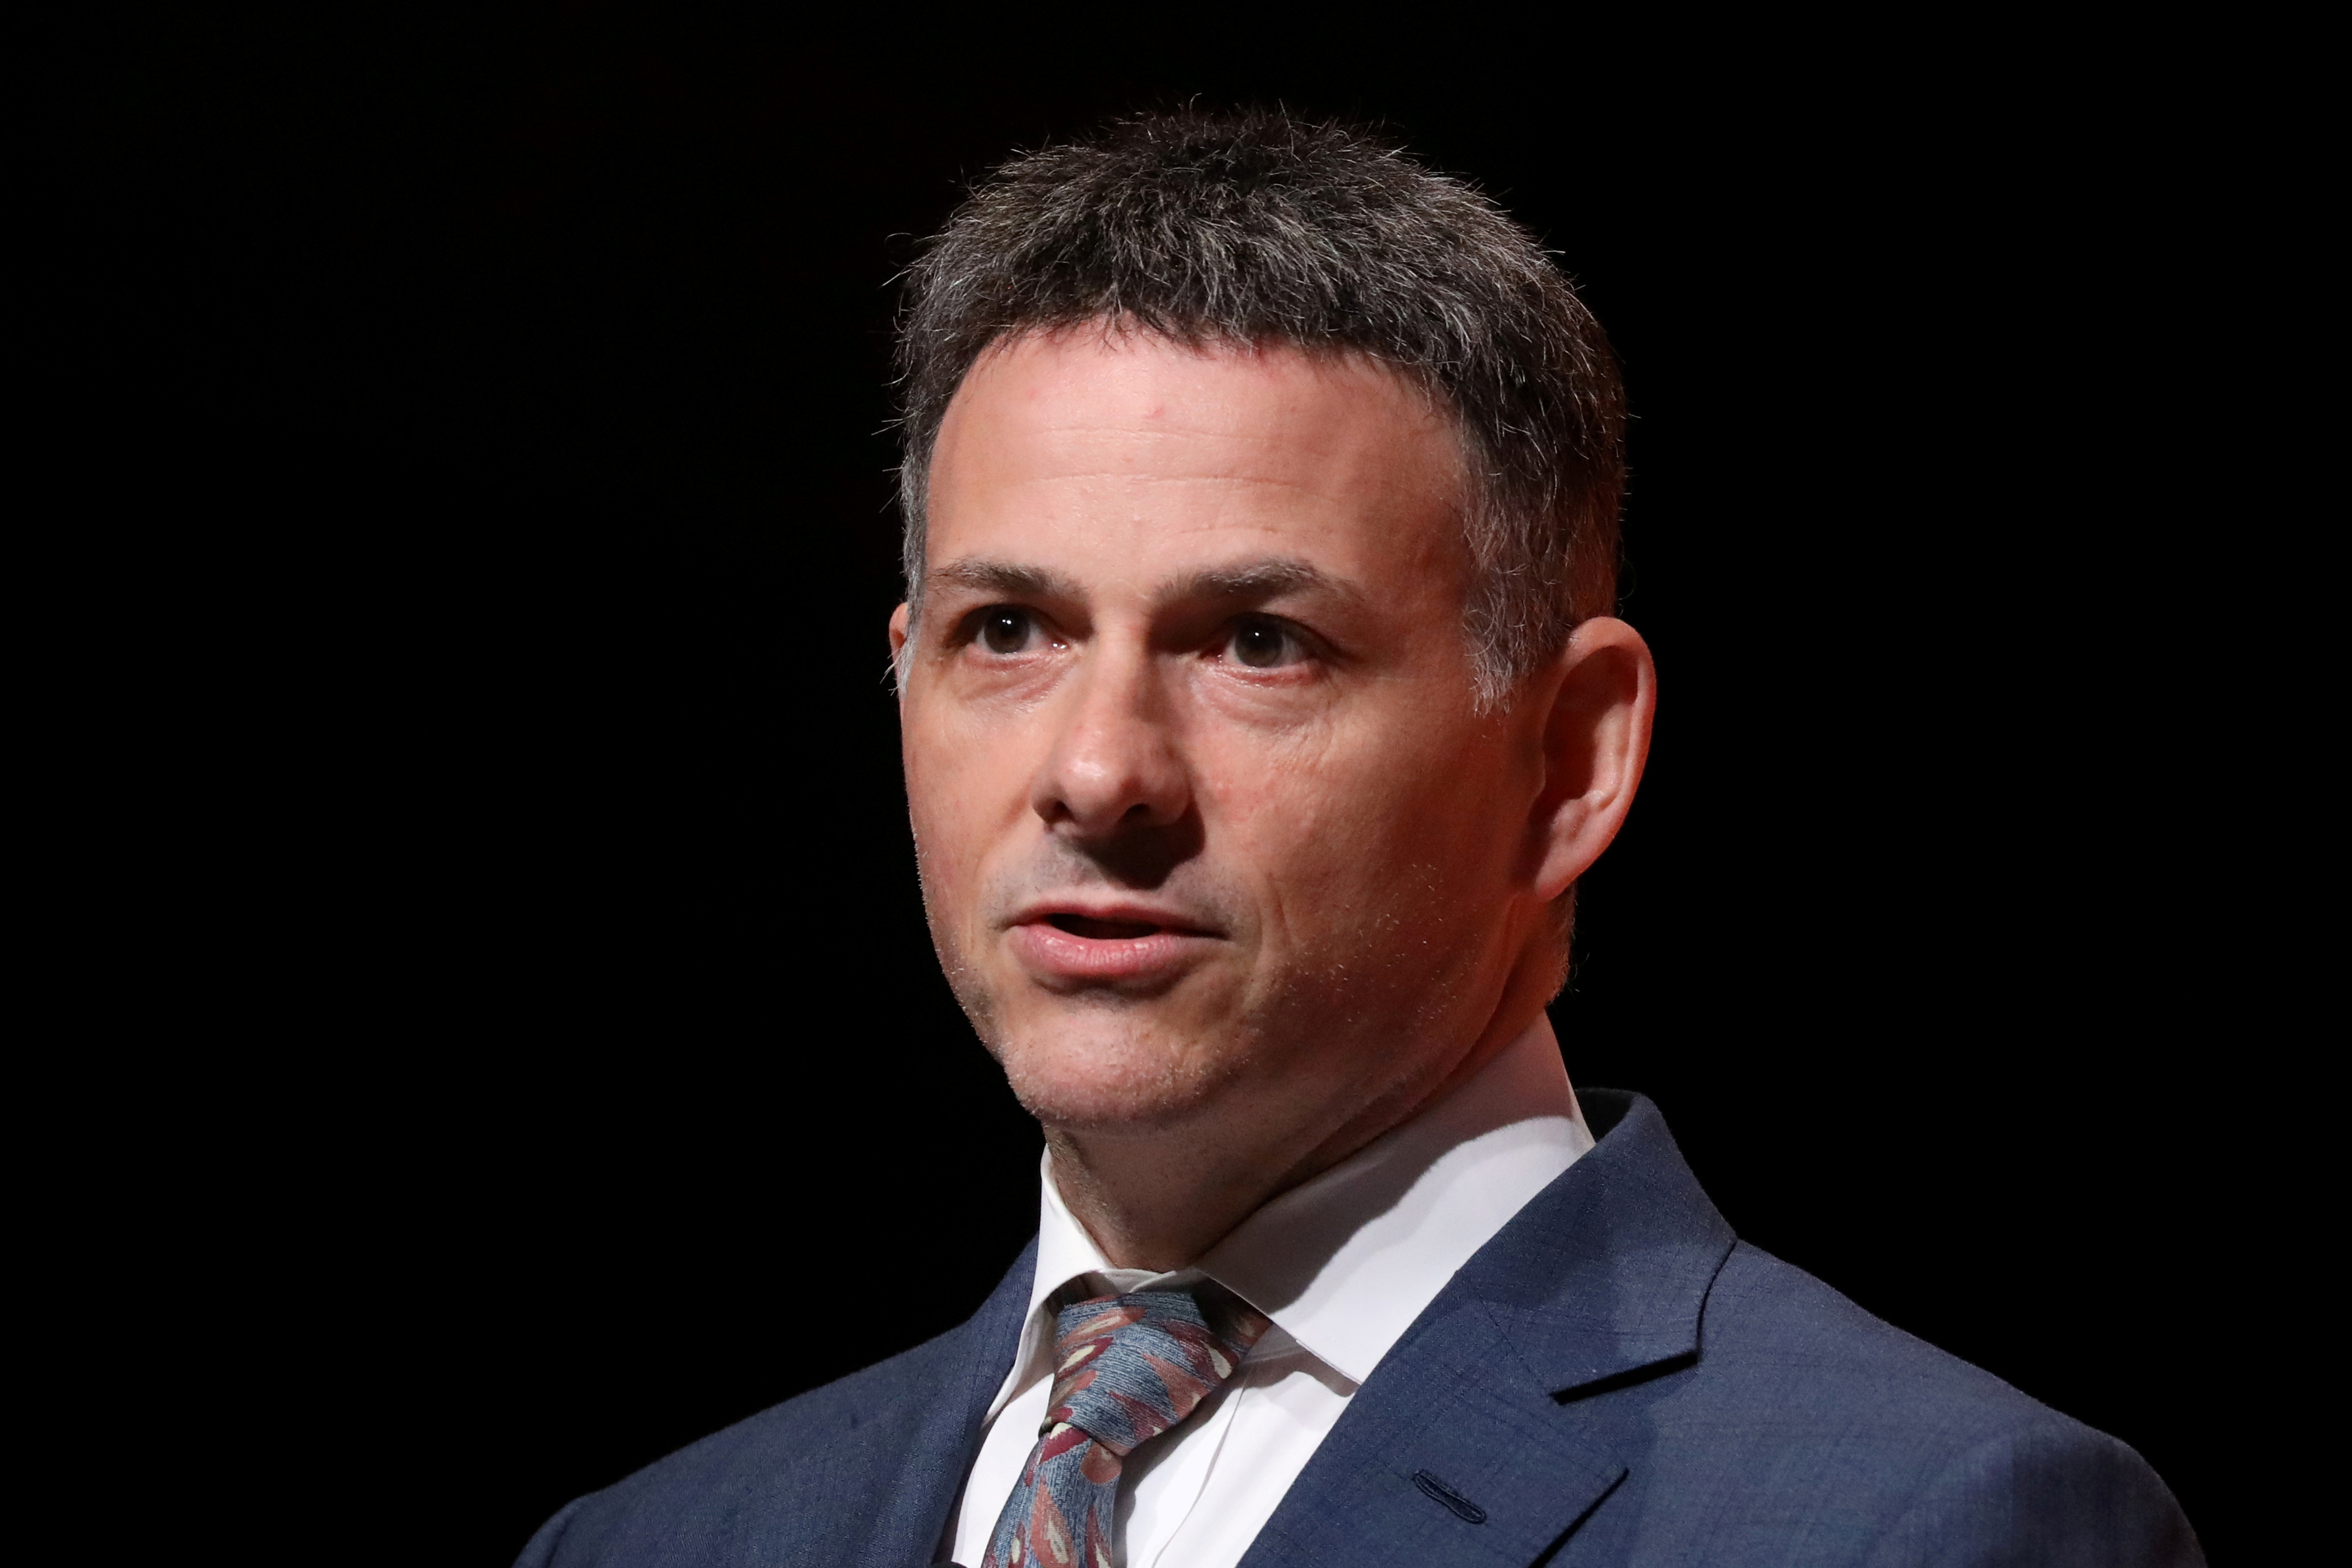 Greenlight Capital's Einhorn speaks at a conference